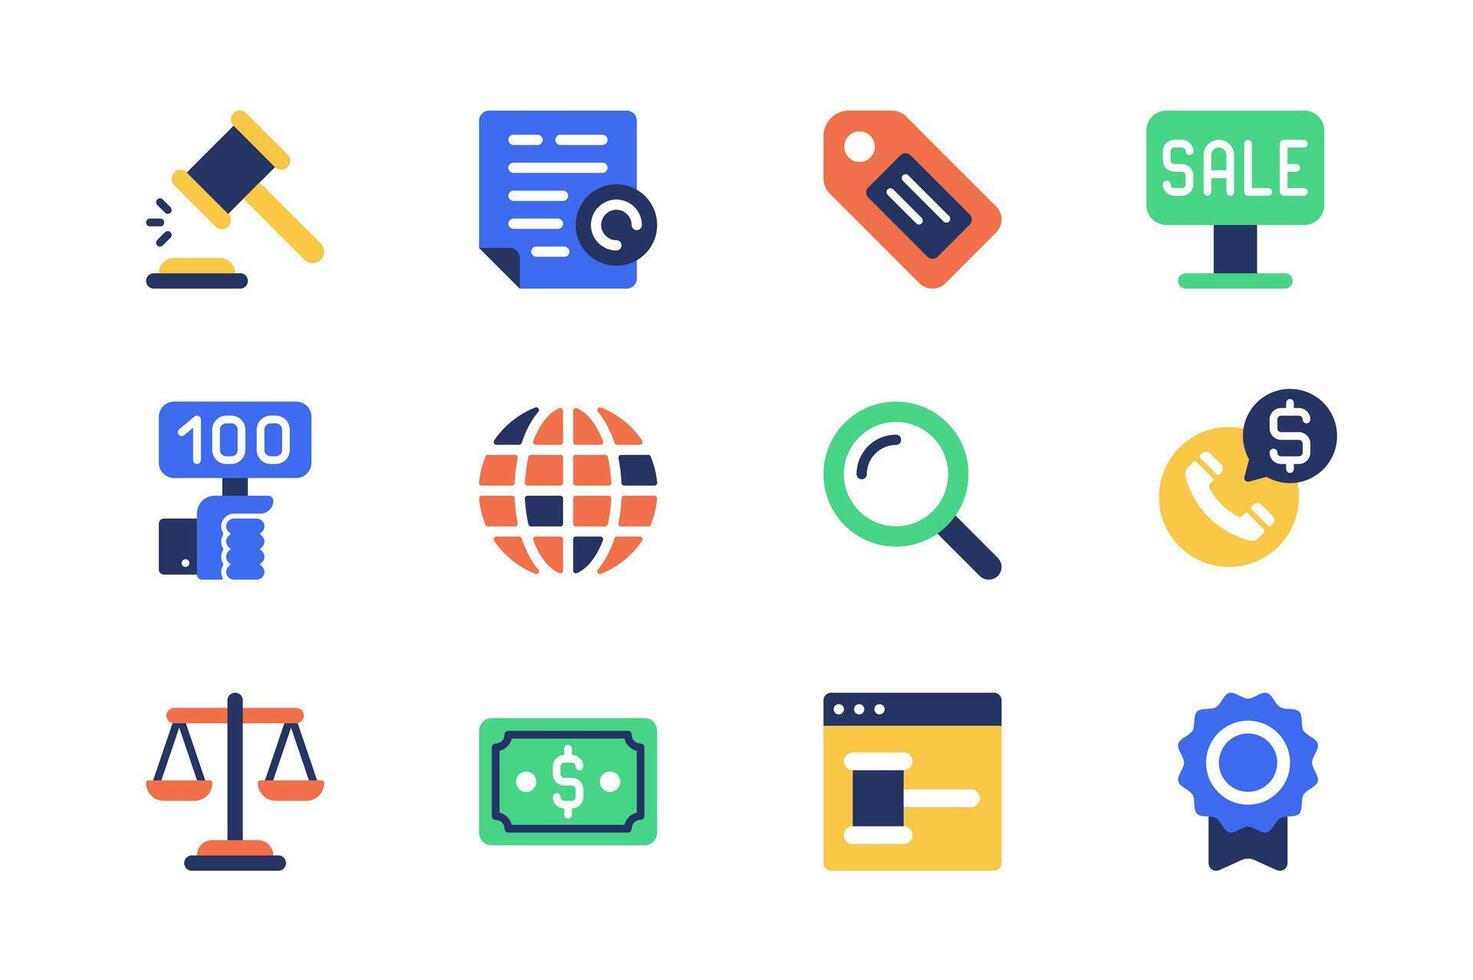 Auction concept of web icons set in simple flat design. Pack of gavel, document, label tag, sale, bidding, search, call, money, cash, online auction page and other. pictograms for mobile app vector